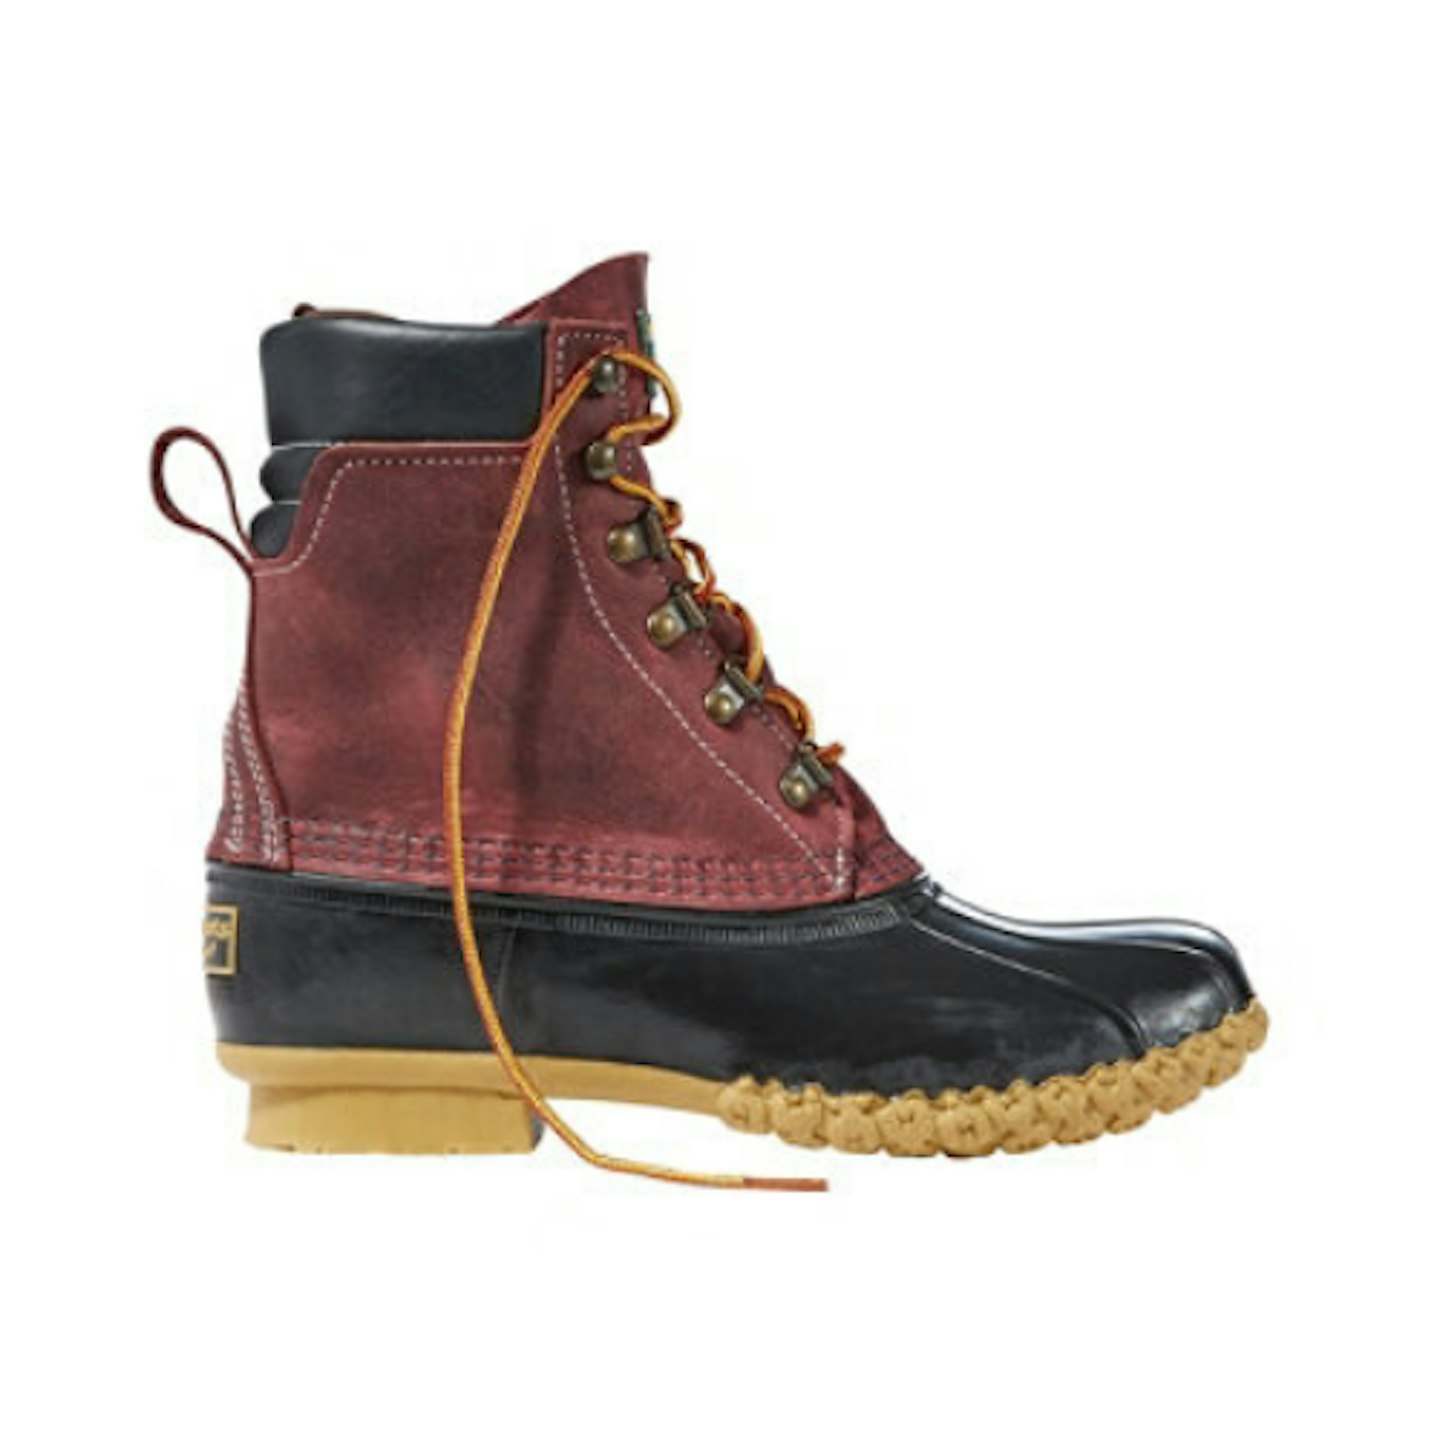 Women's Limited-Edition Bean Boots